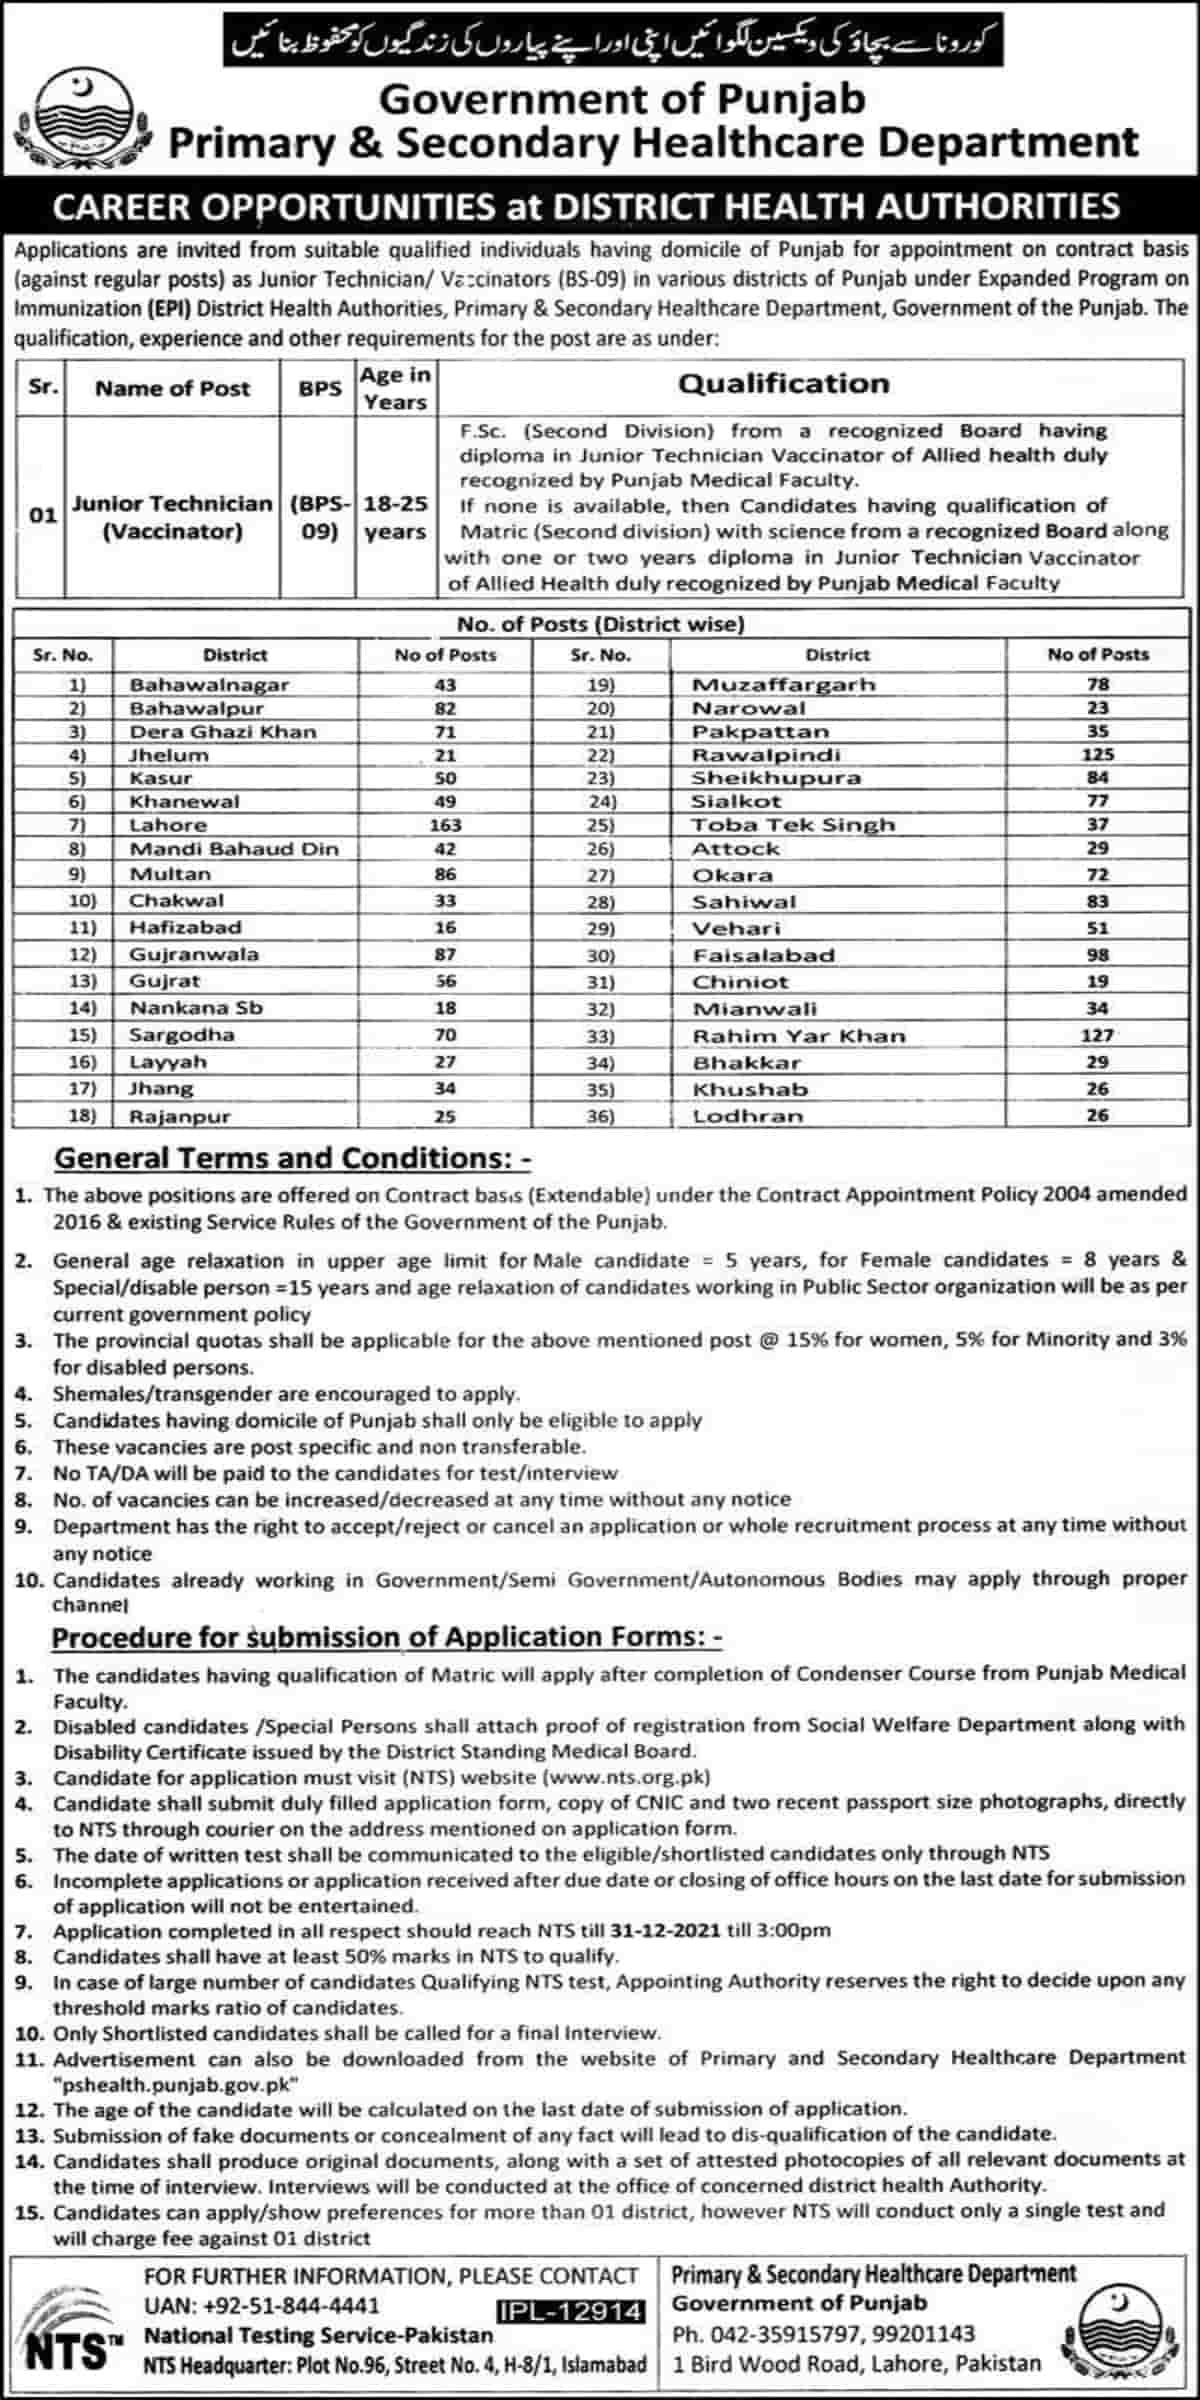 Primary and Secondary Healthcare Department Punjab Jobs 2021 for Vaccinators